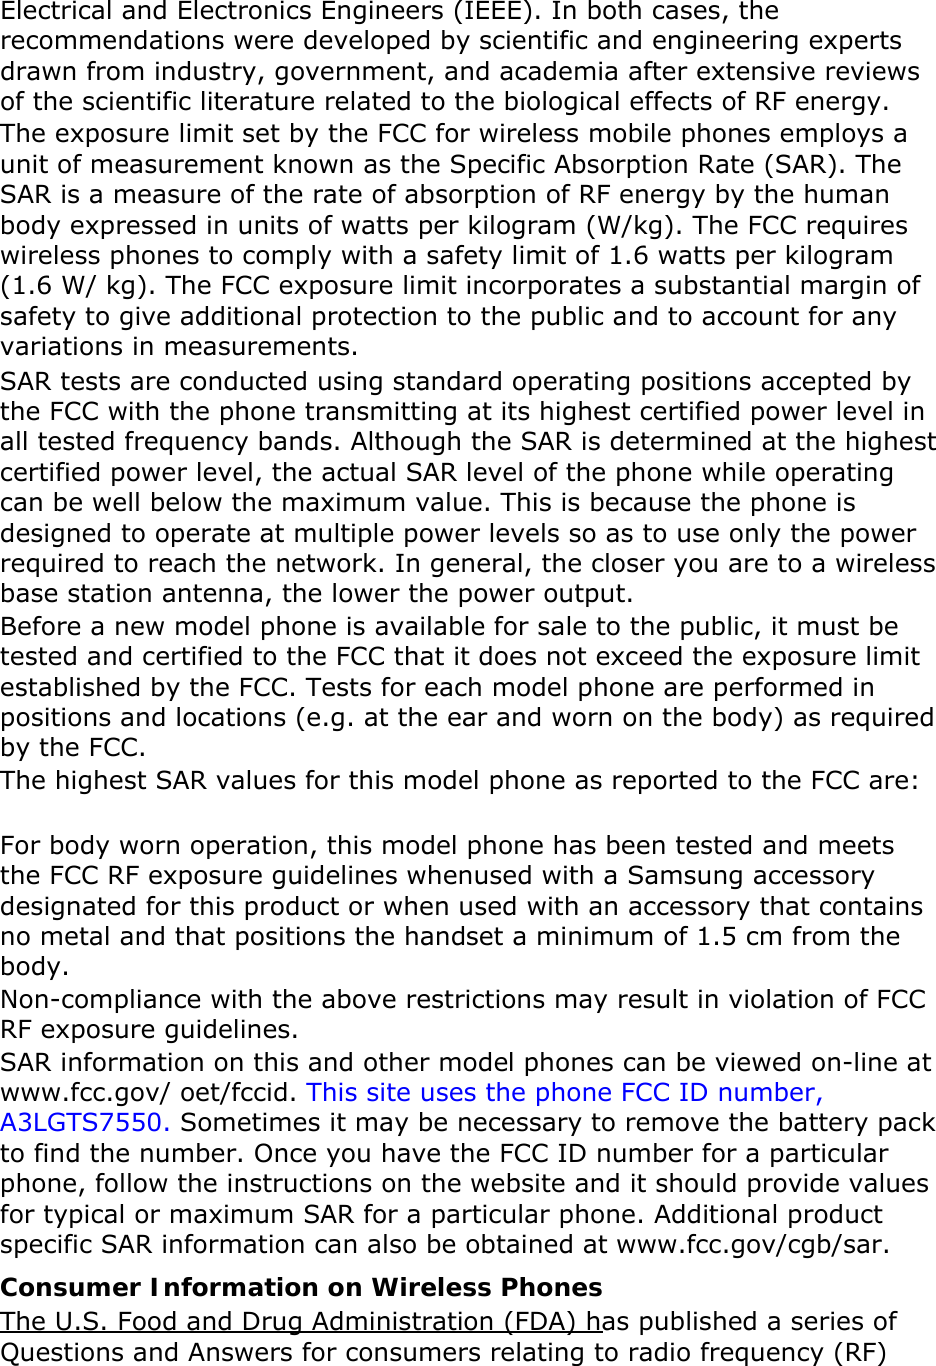 Electrical and Electronics Engineers (IEEE). In both cases, the recommendations were developed by scientific and engineering experts drawn from industry, government, and academia after extensive reviews of the scientific literature related to the biological effects of RF energy. The exposure limit set by the FCC for wireless mobile phones employs a unit of measurement known as the Specific Absorption Rate (SAR). The SAR is a measure of the rate of absorption of RF energy by the human body expressed in units of watts per kilogram (W/kg). The FCC requires wireless phones to comply with a safety limit of 1.6 watts per kilogram (1.6 W/ kg). The FCC exposure limit incorporates a substantial margin of safety to give additional protection to the public and to account for any variations in measurements. SAR tests are conducted using standard operating positions accepted by the FCC with the phone transmitting at its highest certified power level in all tested frequency bands. Although the SAR is determined at the highest certified power level, the actual SAR level of the phone while operating can be well below the maximum value. This is because the phone is designed to operate at multiple power levels so as to use only the power required to reach the network. In general, the closer you are to a wireless base station antenna, the lower the power output. Before a new model phone is available for sale to the public, it must be tested and certified to the FCC that it does not exceed the exposure limit established by the FCC. Tests for each model phone are performed in positions and locations (e.g. at the ear and worn on the body) as required by the FCC.     The highest SAR values for this model phone as reported to the FCC are:   For body worn operation, this model phone has been tested and meets the FCC RF exposure guidelines whenused with a Samsung accessory designated for this product or when used with an accessory that contains no metal and that positions the handset a minimum of 1.5 cm from the body.  Non-compliance with the above restrictions may result in violation of FCC RF exposure guidelines. SAR information on this and other model phones can be viewed on-line at www.fcc.gov/ oet/fccid. This site uses the phone FCC ID number, A3LGTS7550. Sometimes it may be necessary to remove the battery pack to find the number. Once you have the FCC ID number for a particular phone, follow the instructions on the website and it should provide values for typical or maximum SAR for a particular phone. Additional product specific SAR information can also be obtained at www.fcc.gov/cgb/sar. Consumer Information on Wireless Phones The U.S. Food and Drug Administration (FDA) has published a series of Questions and Answers for consumers relating to radio frequency (RF) 